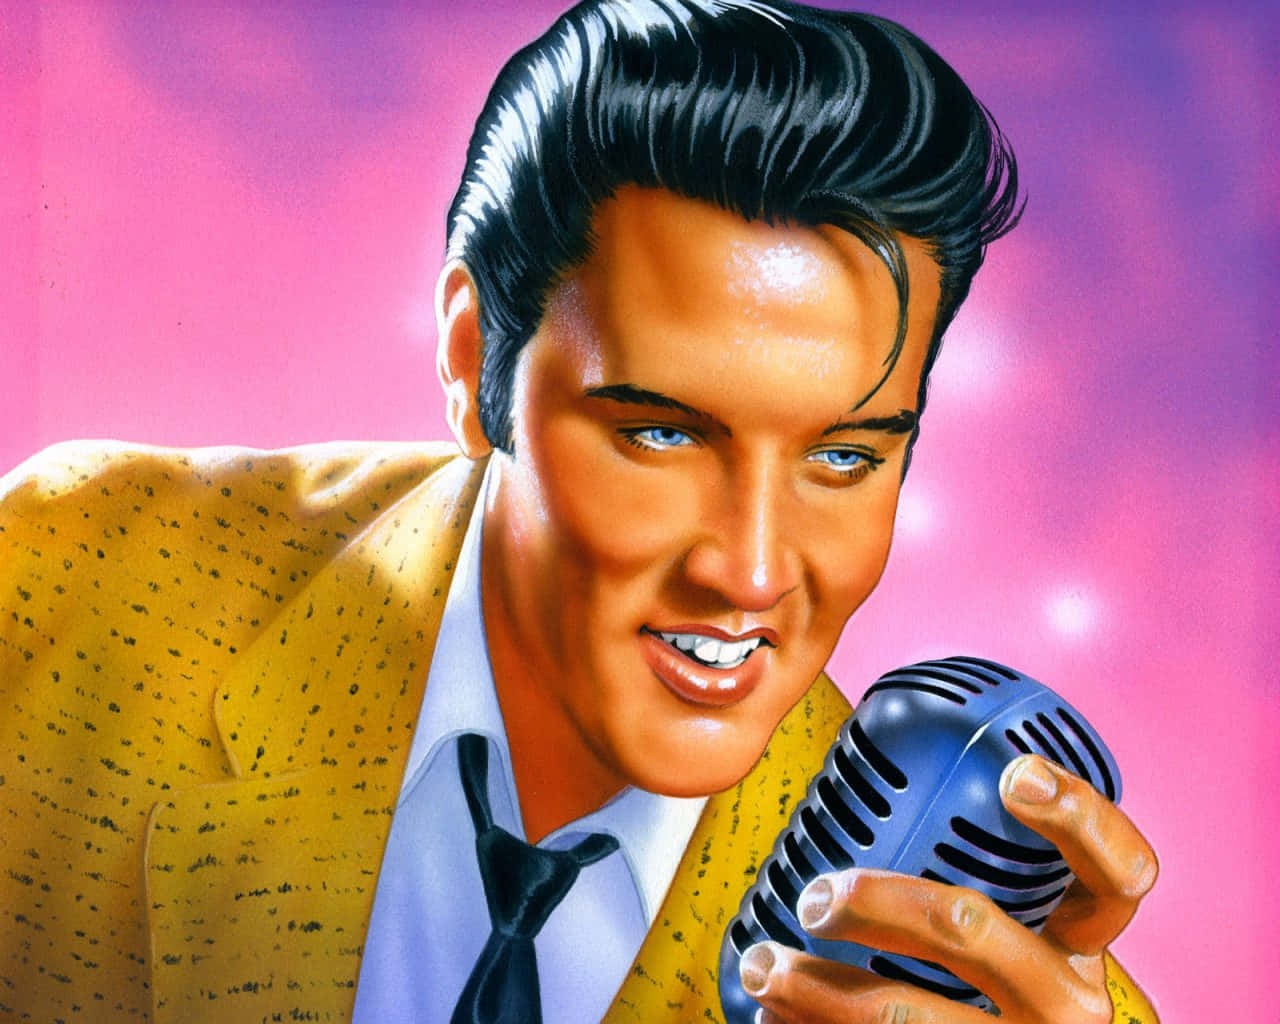 Elvis Presley In A Yellow Suit Holding A Microphone